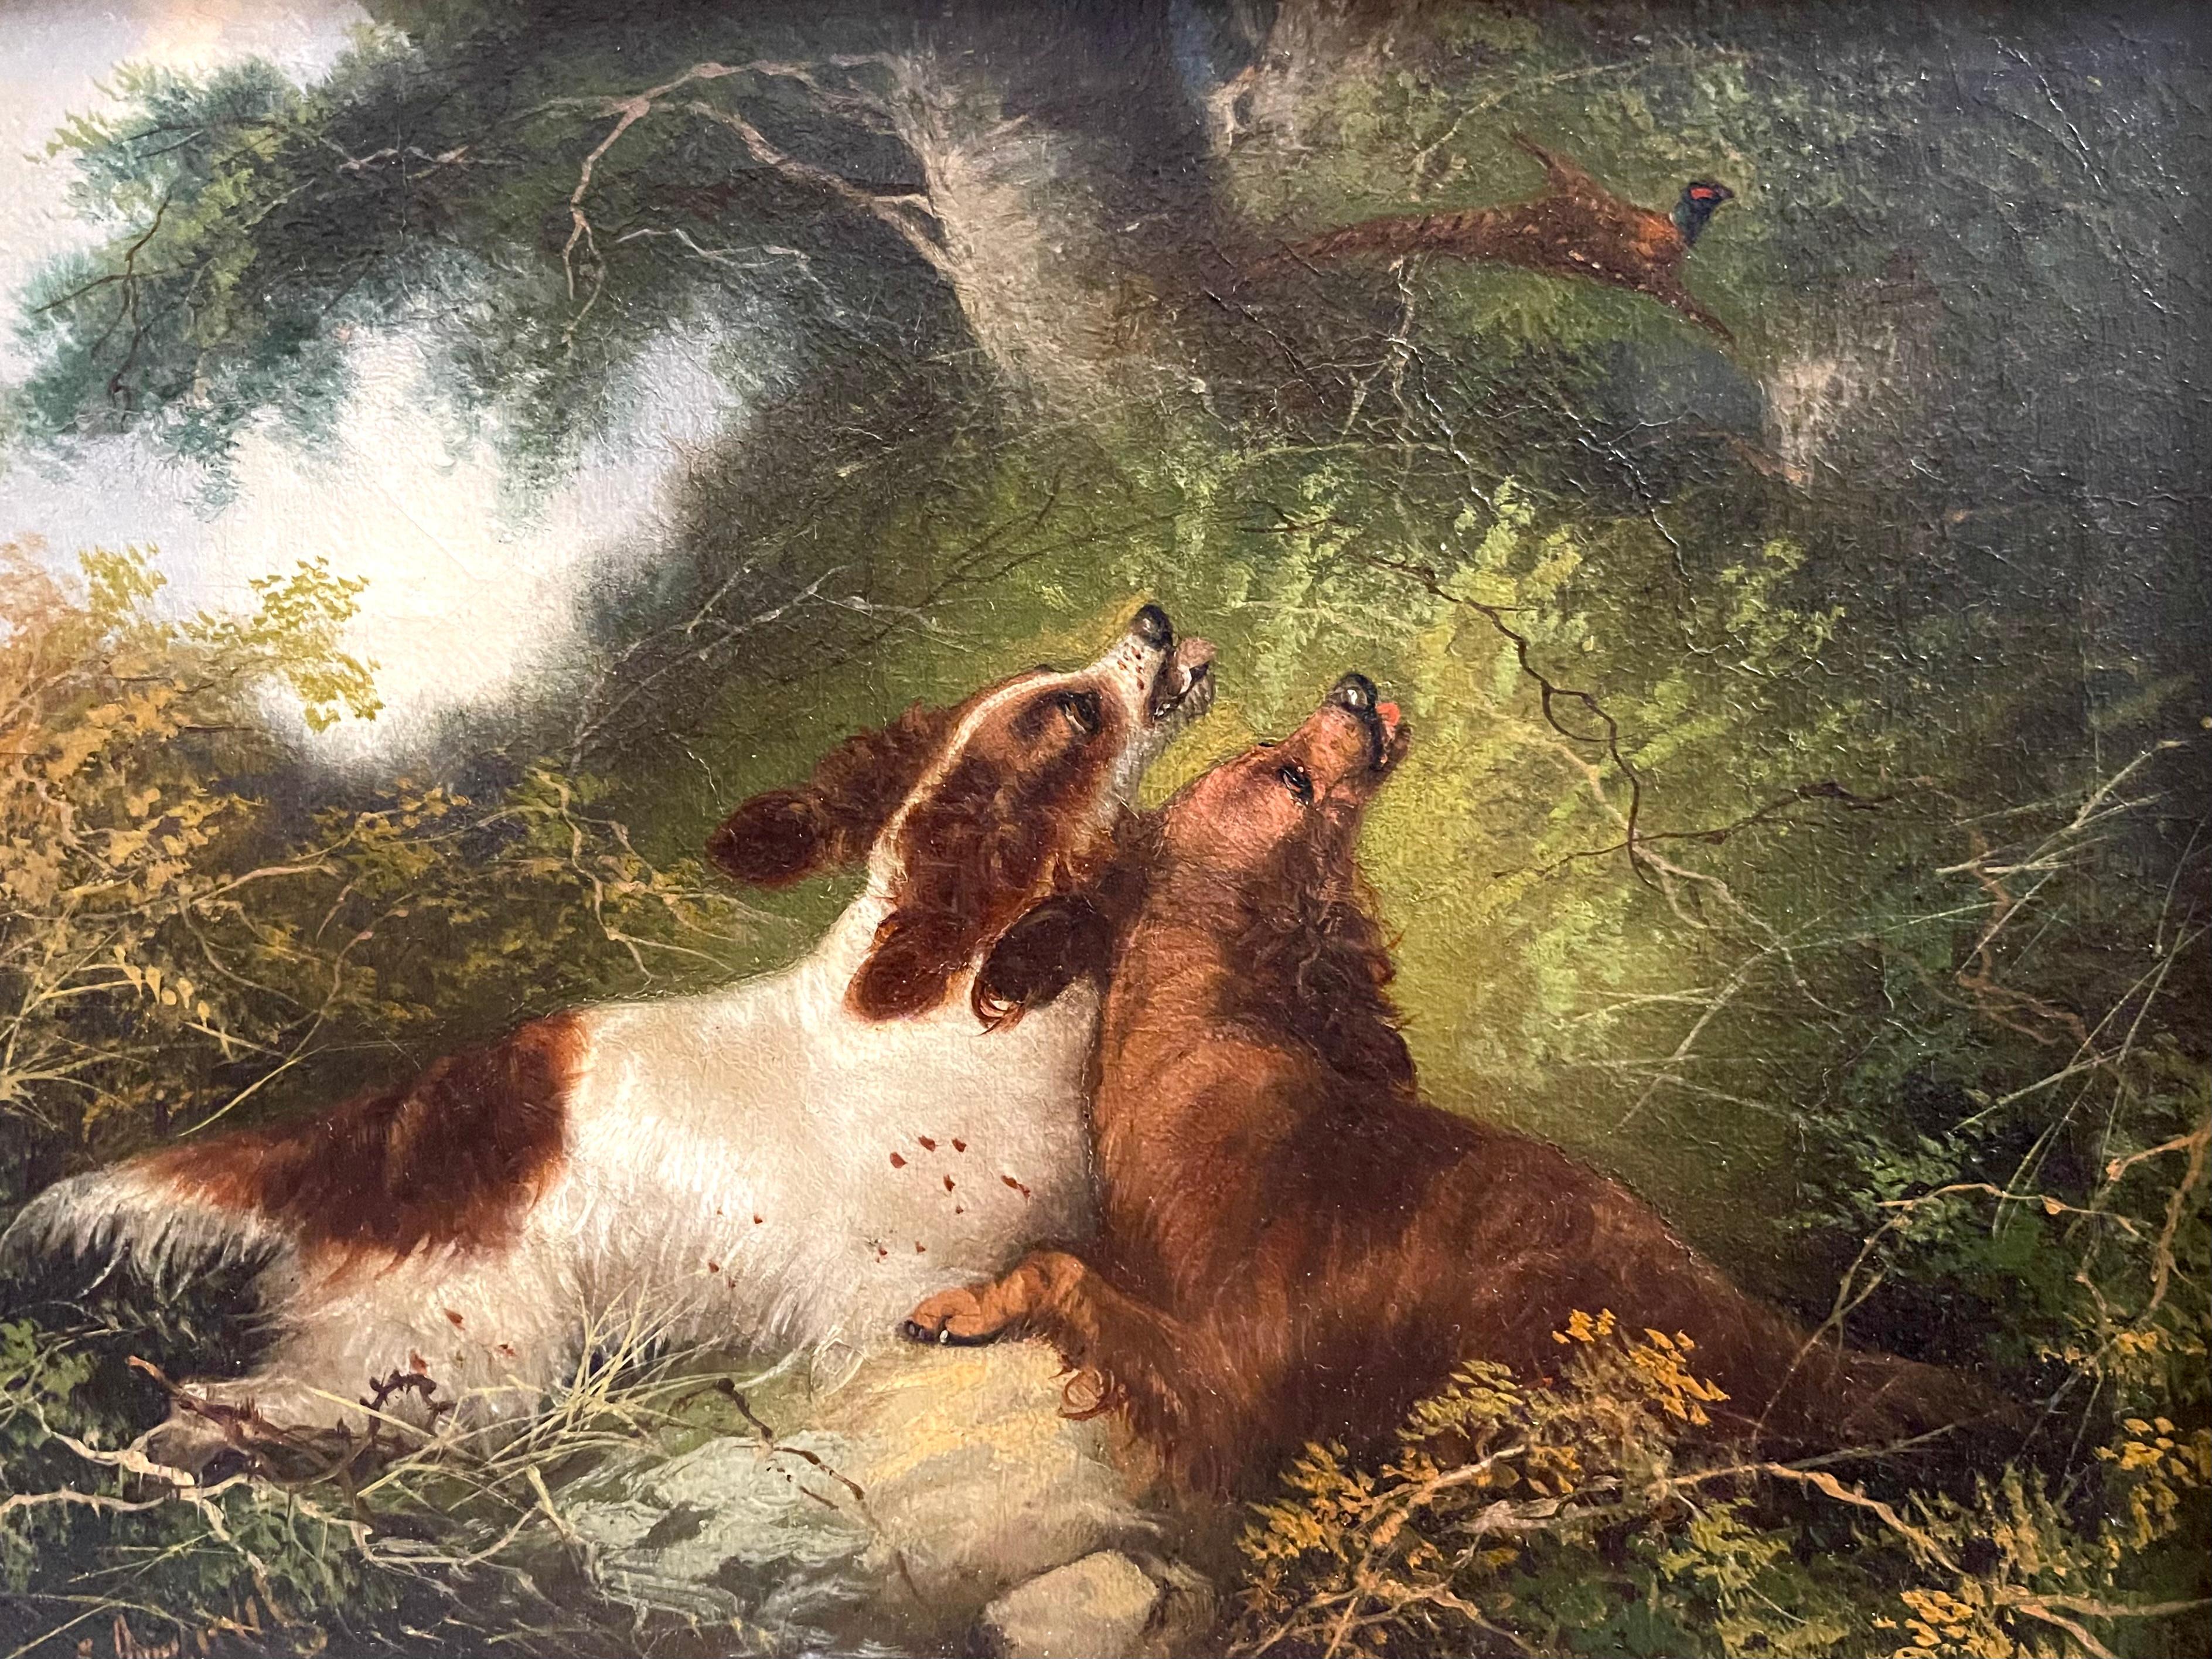 Charming oil painting on canvas by renowned genre artist George Armfield (1808-1893), of two dogs chasing a pheasant. The expression of  sheer dog happiness in the chase. and the pheasant at a safe distance, contribute to the delightful character of